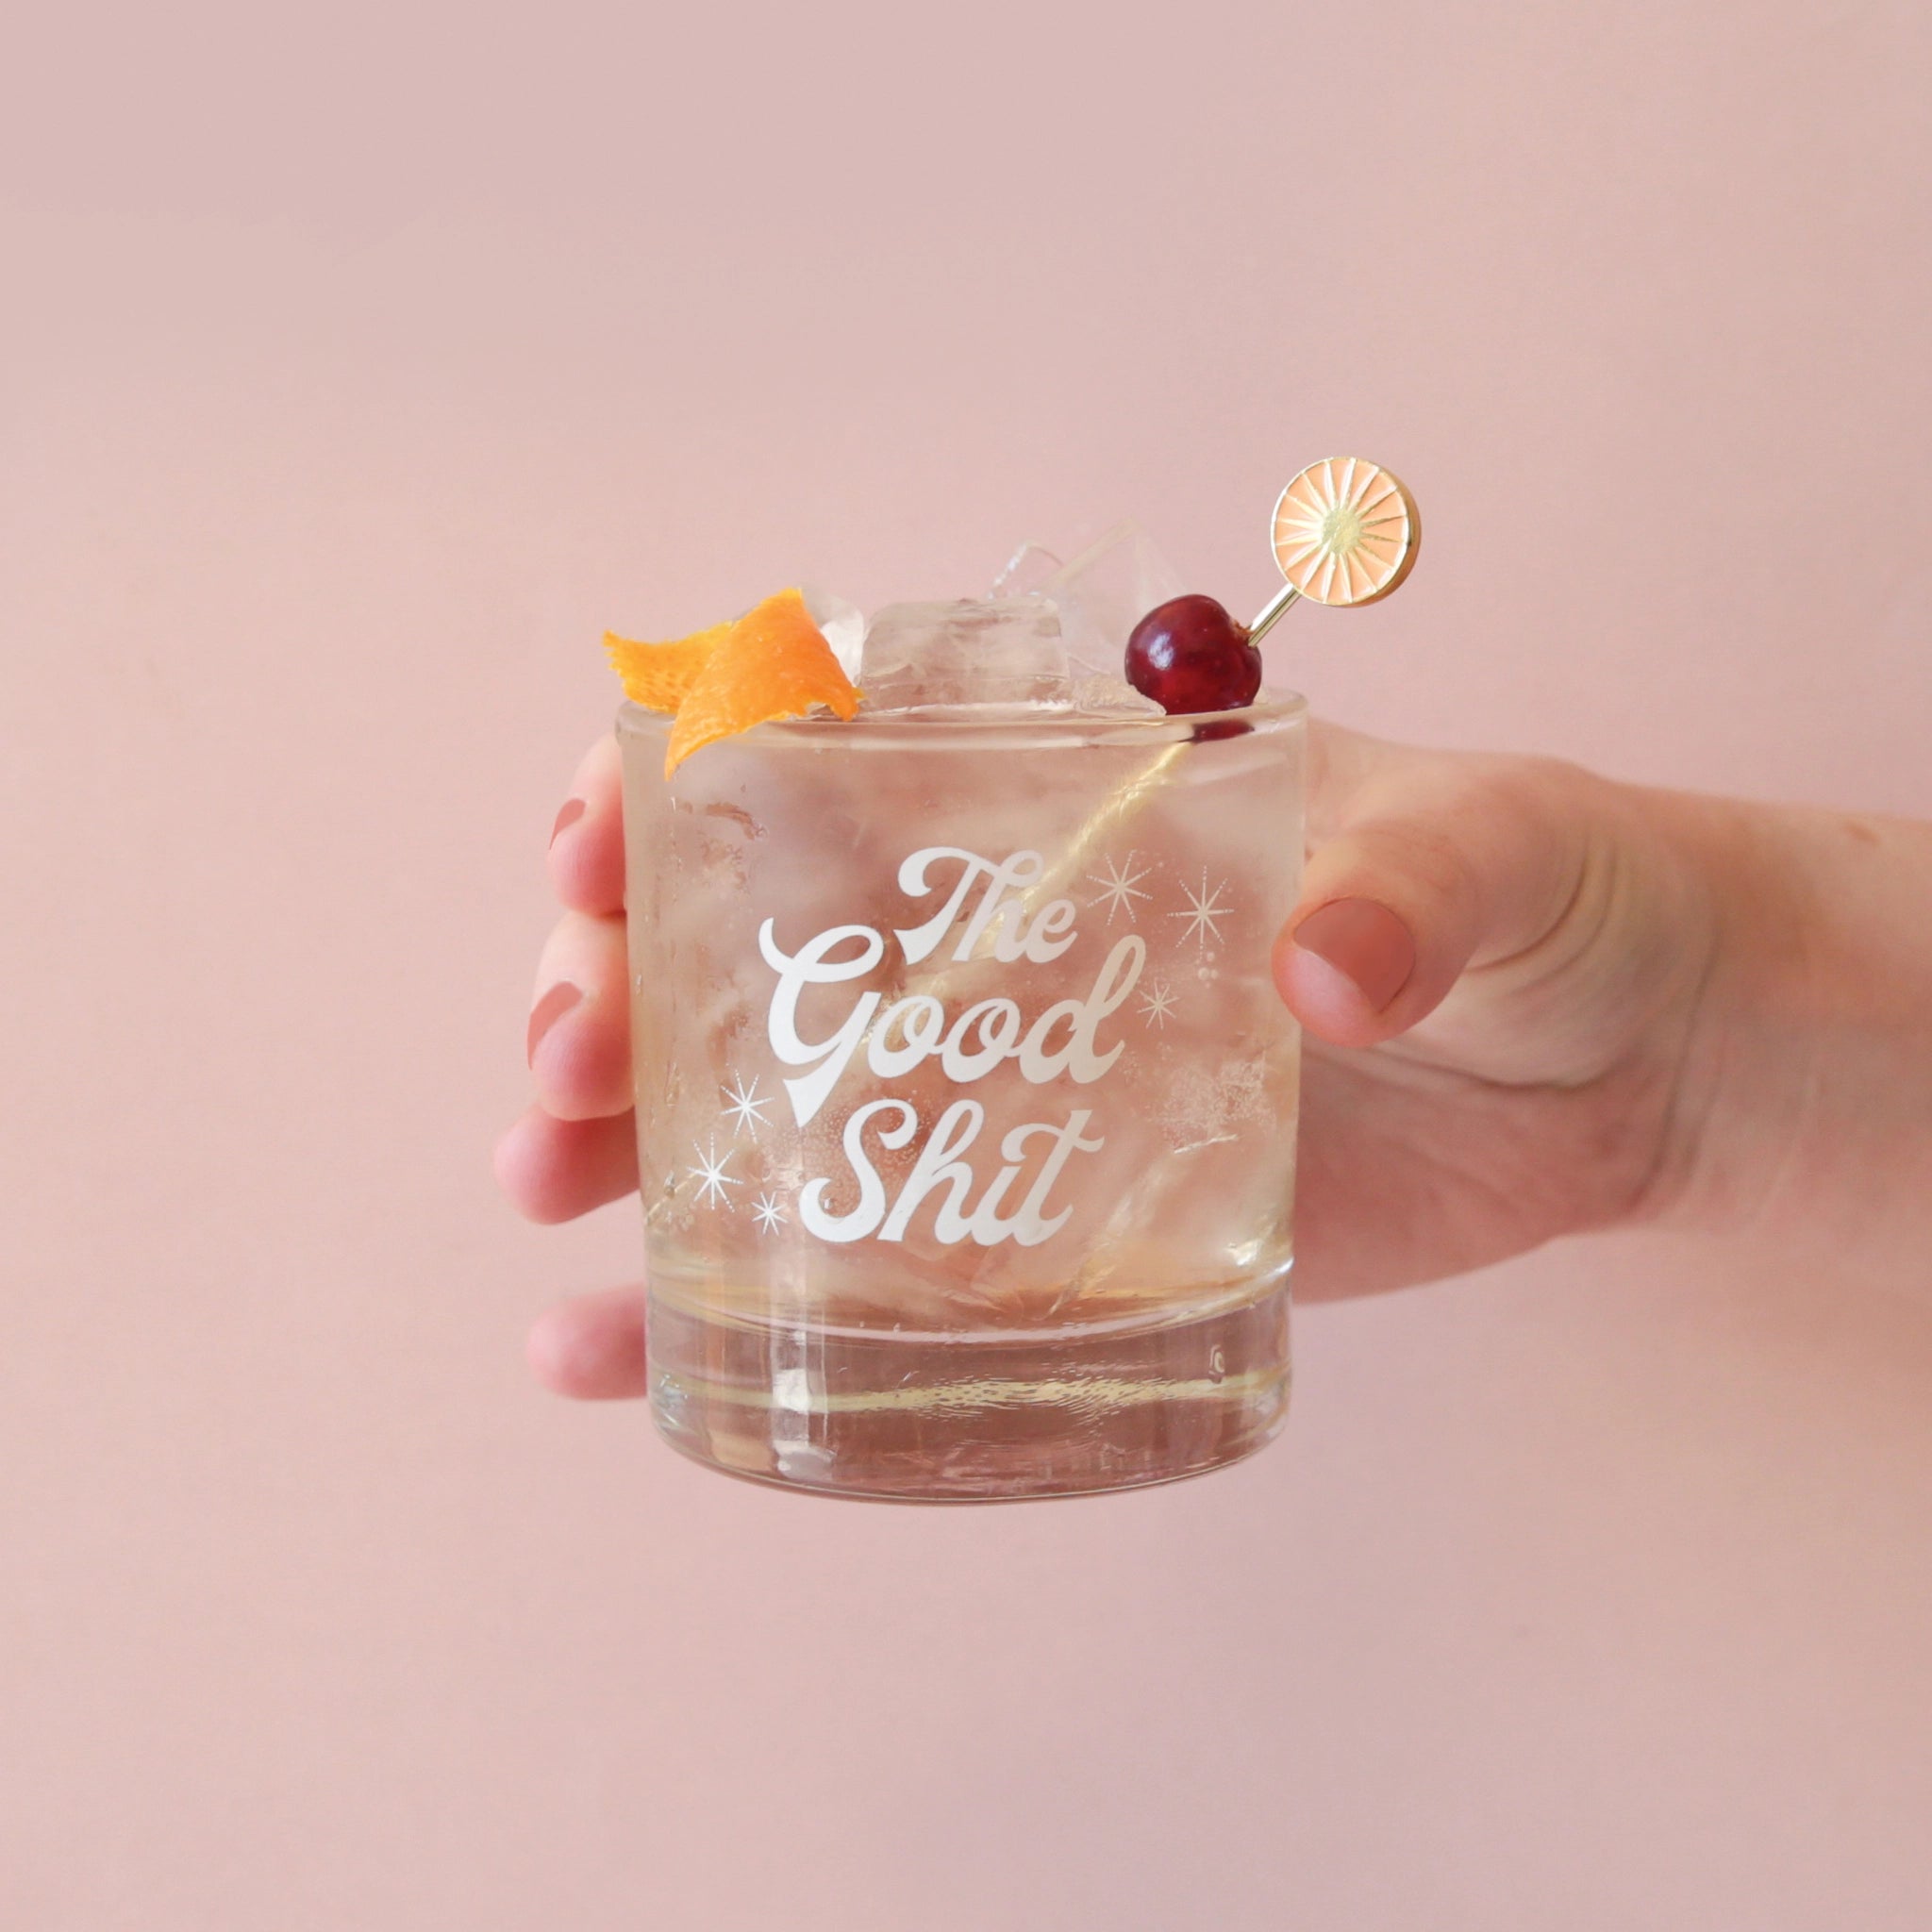 Against a peachy pink background is a photograph of a short glass tumbler with a thick bottom and "The Good Shit" printed across the center in white groovy cursive text staged here with a cocktail pick along with a cranberry and orange peel garnish.